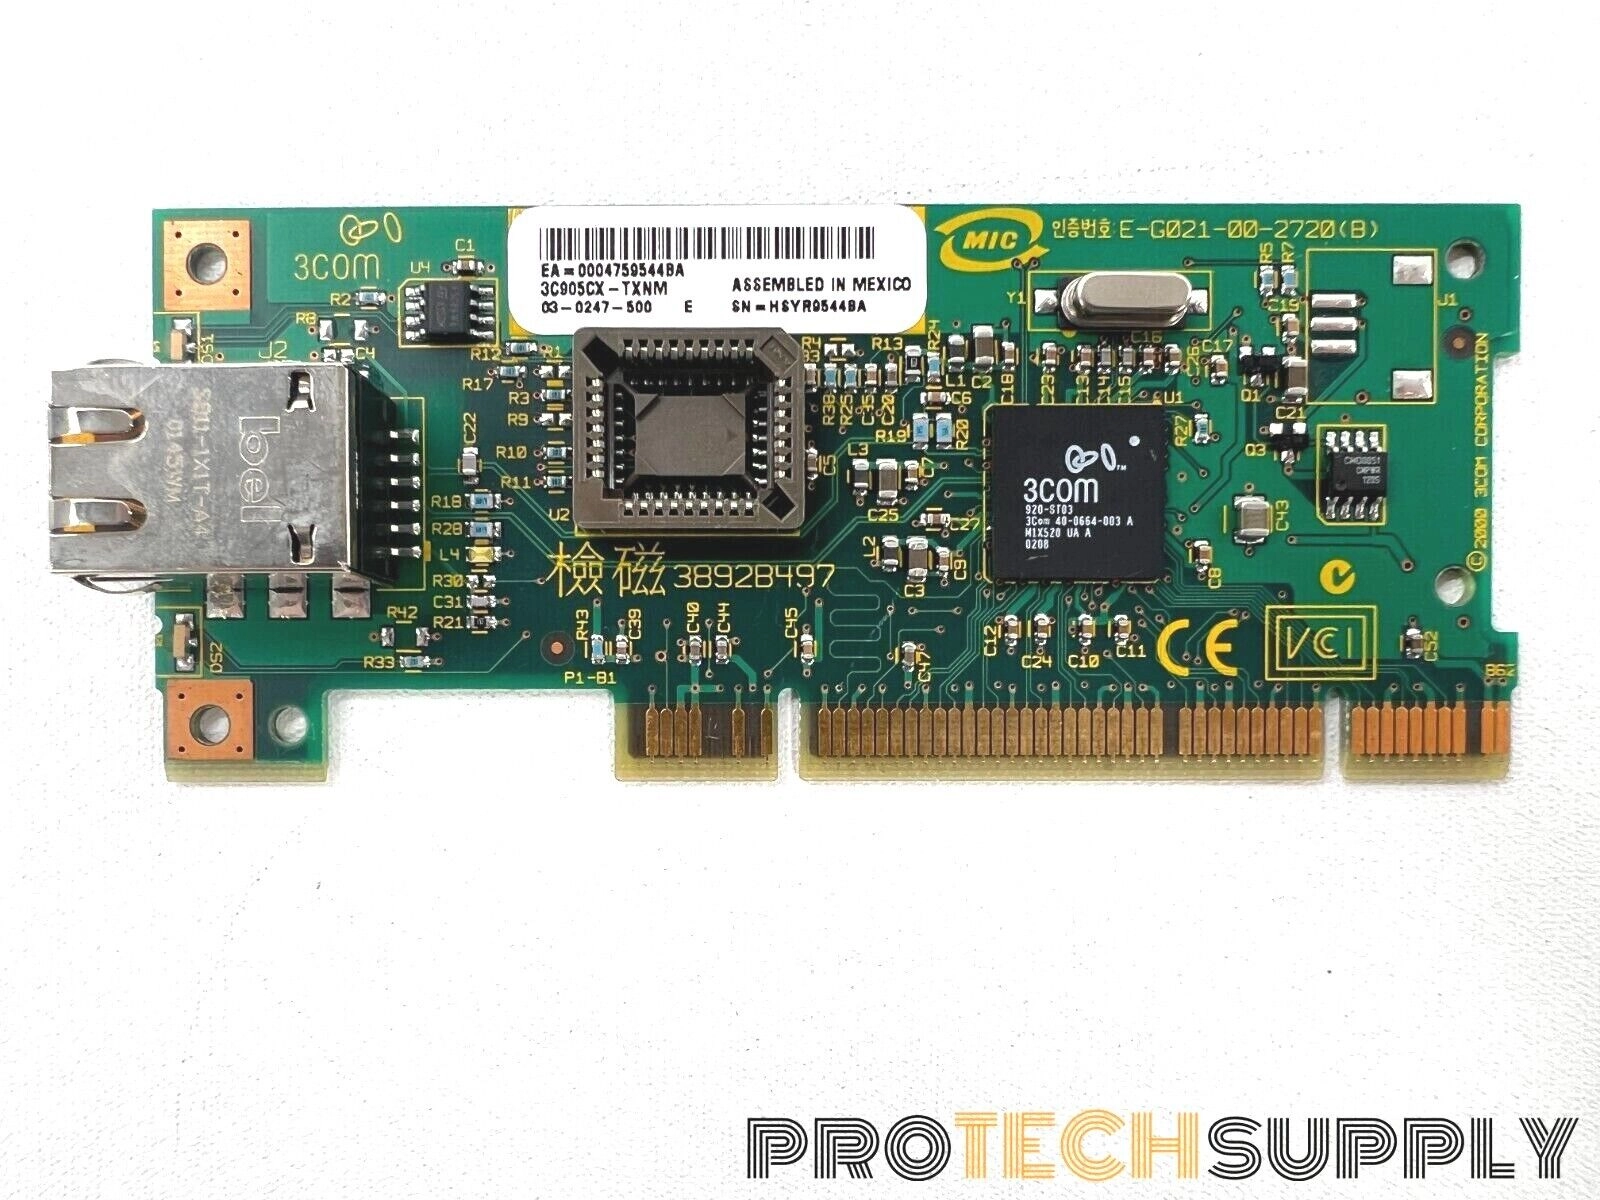 3com 3C905CX-TXNM 10/100Mbps PCI Network Card with